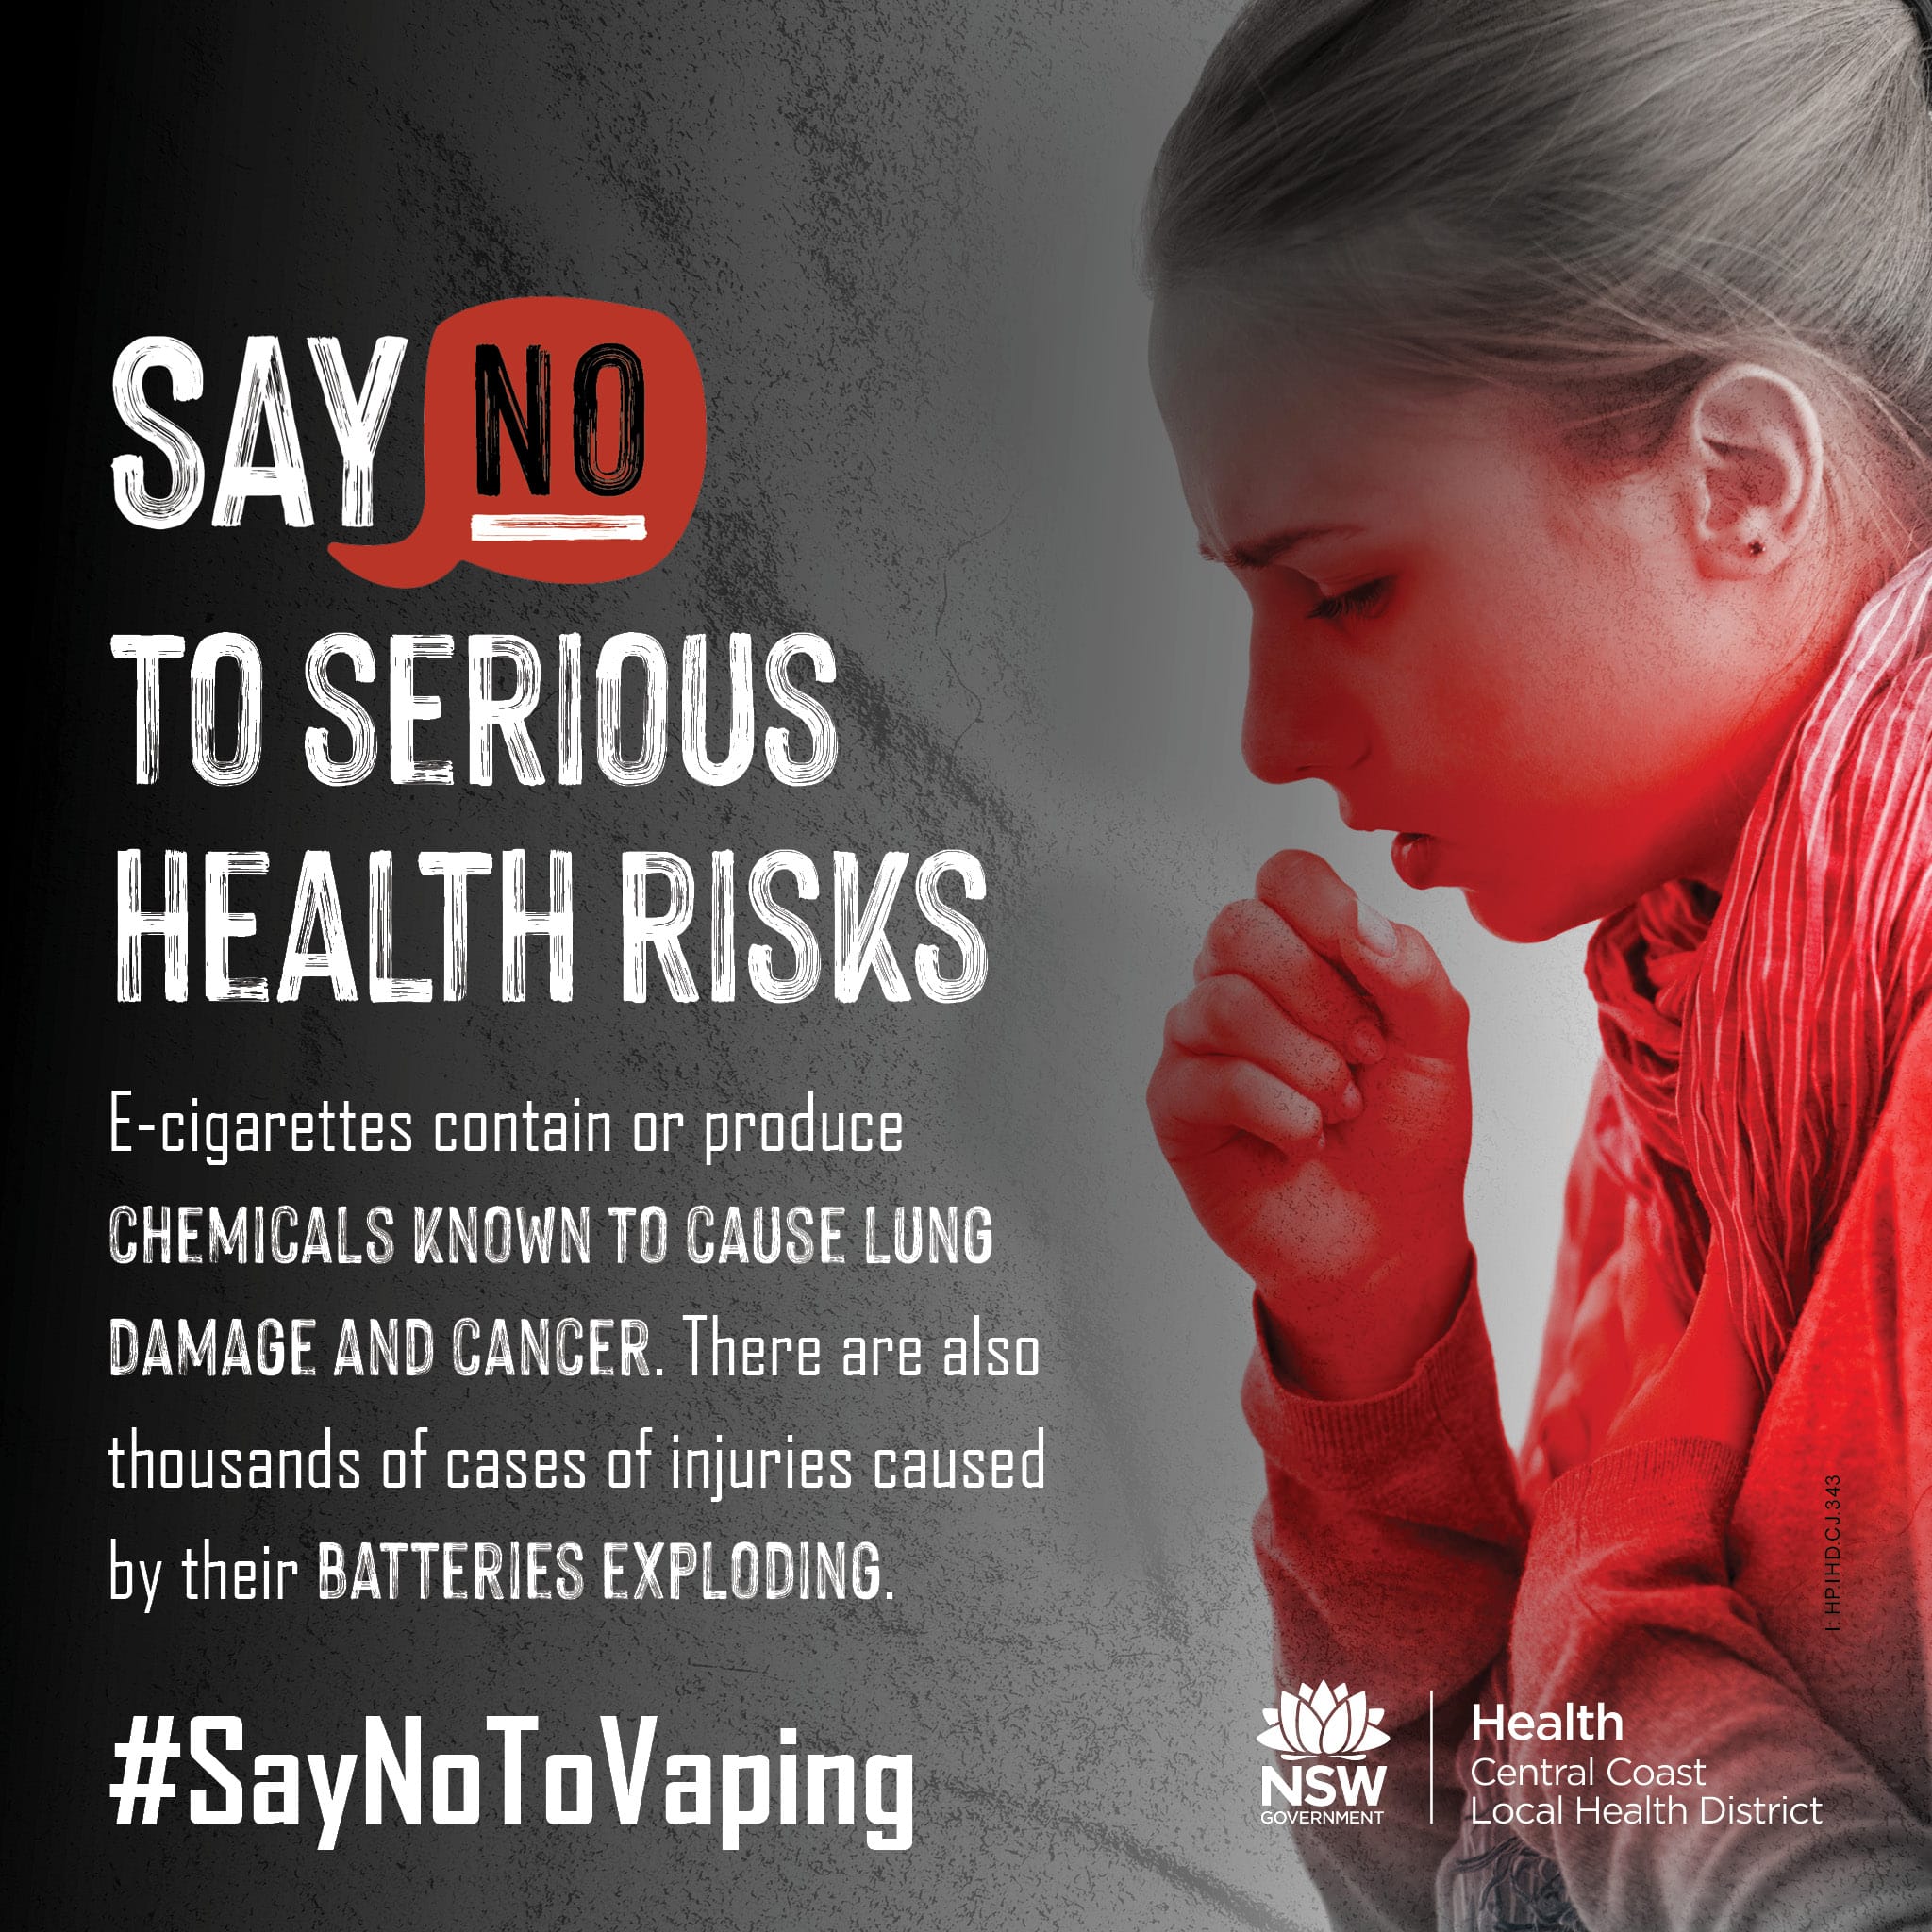 The Say No to Serious Health Risks social media tile preview image featuring a young girl coughing.